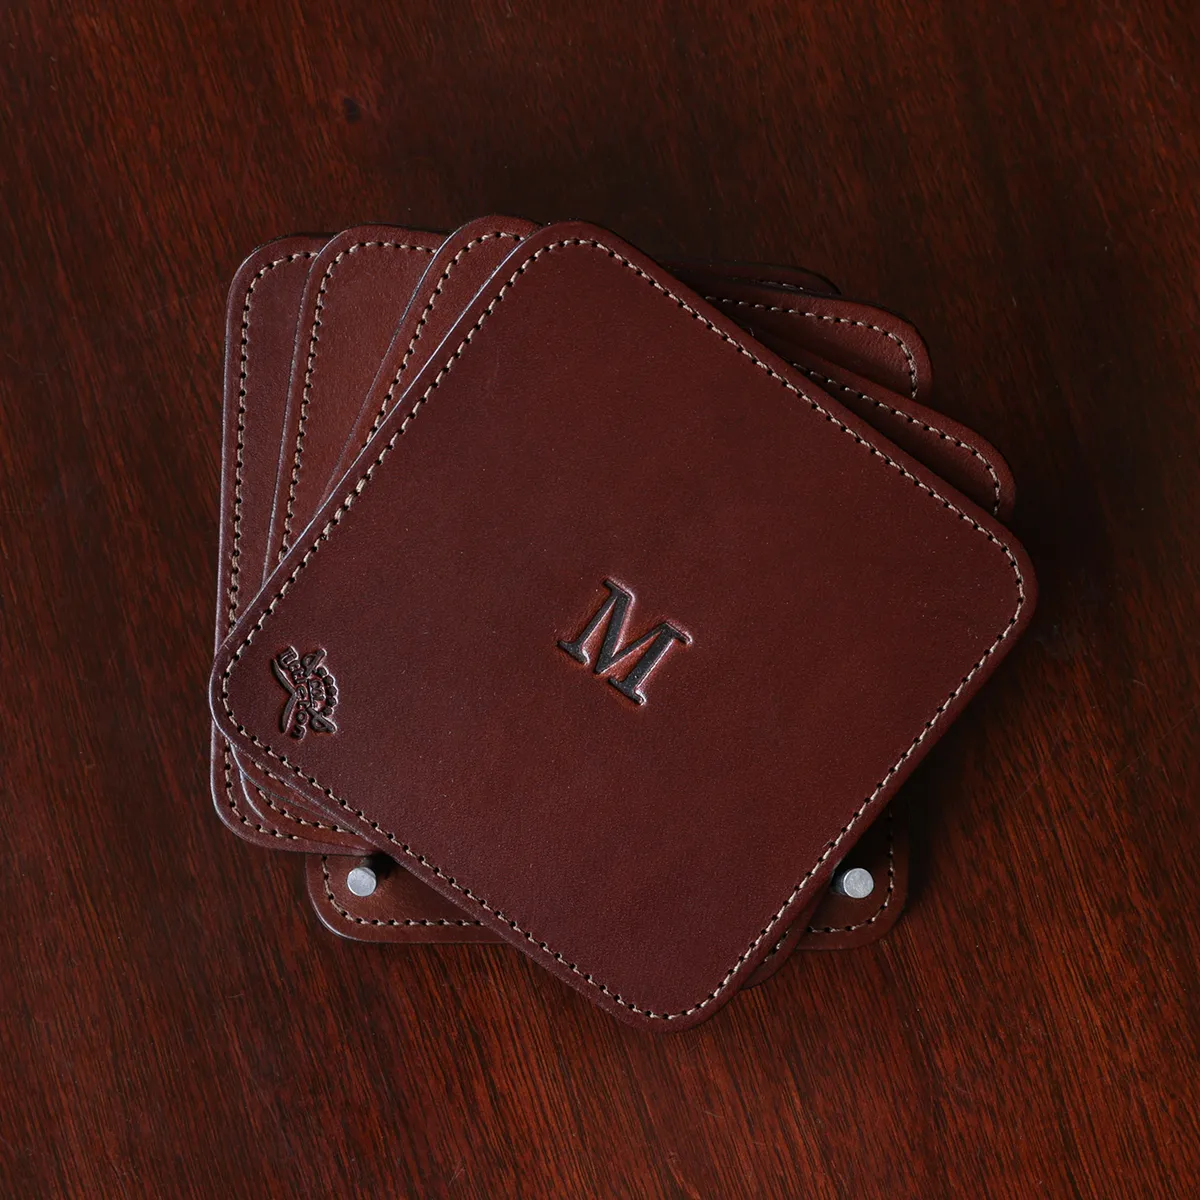 Leather Coasters Square Set of 4, Best & USA Made